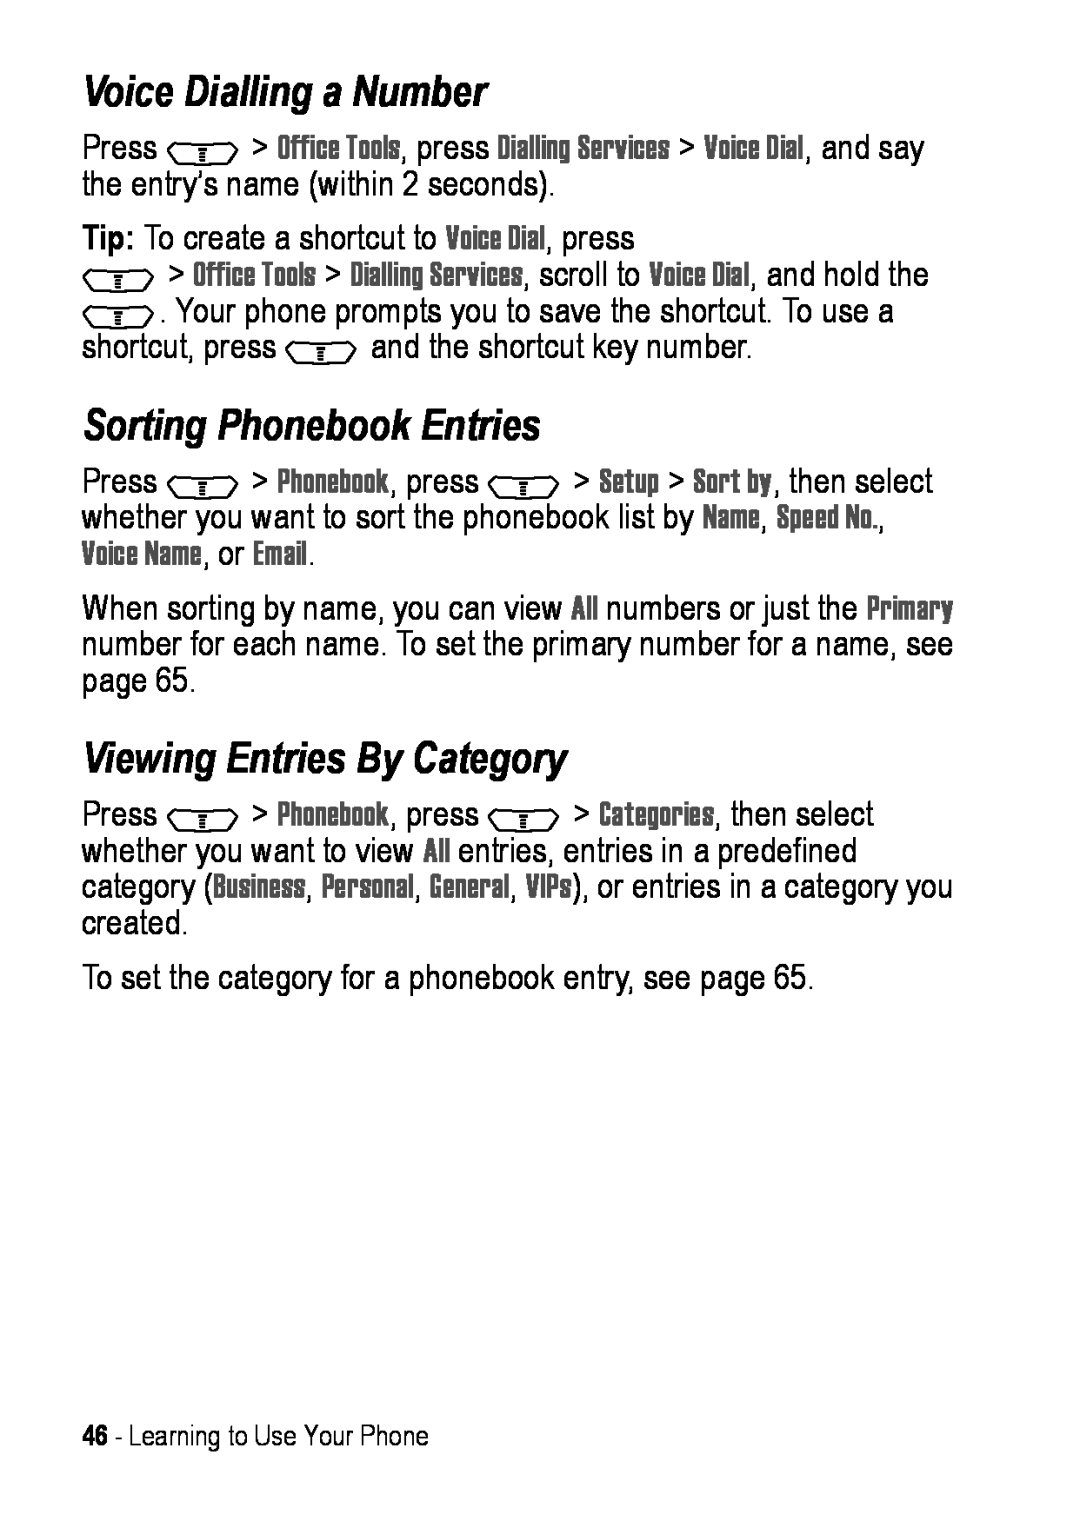 Motorola C390 manual Voice Dialling a Number, Sorting Phonebook Entries, Viewing Entries By Category 